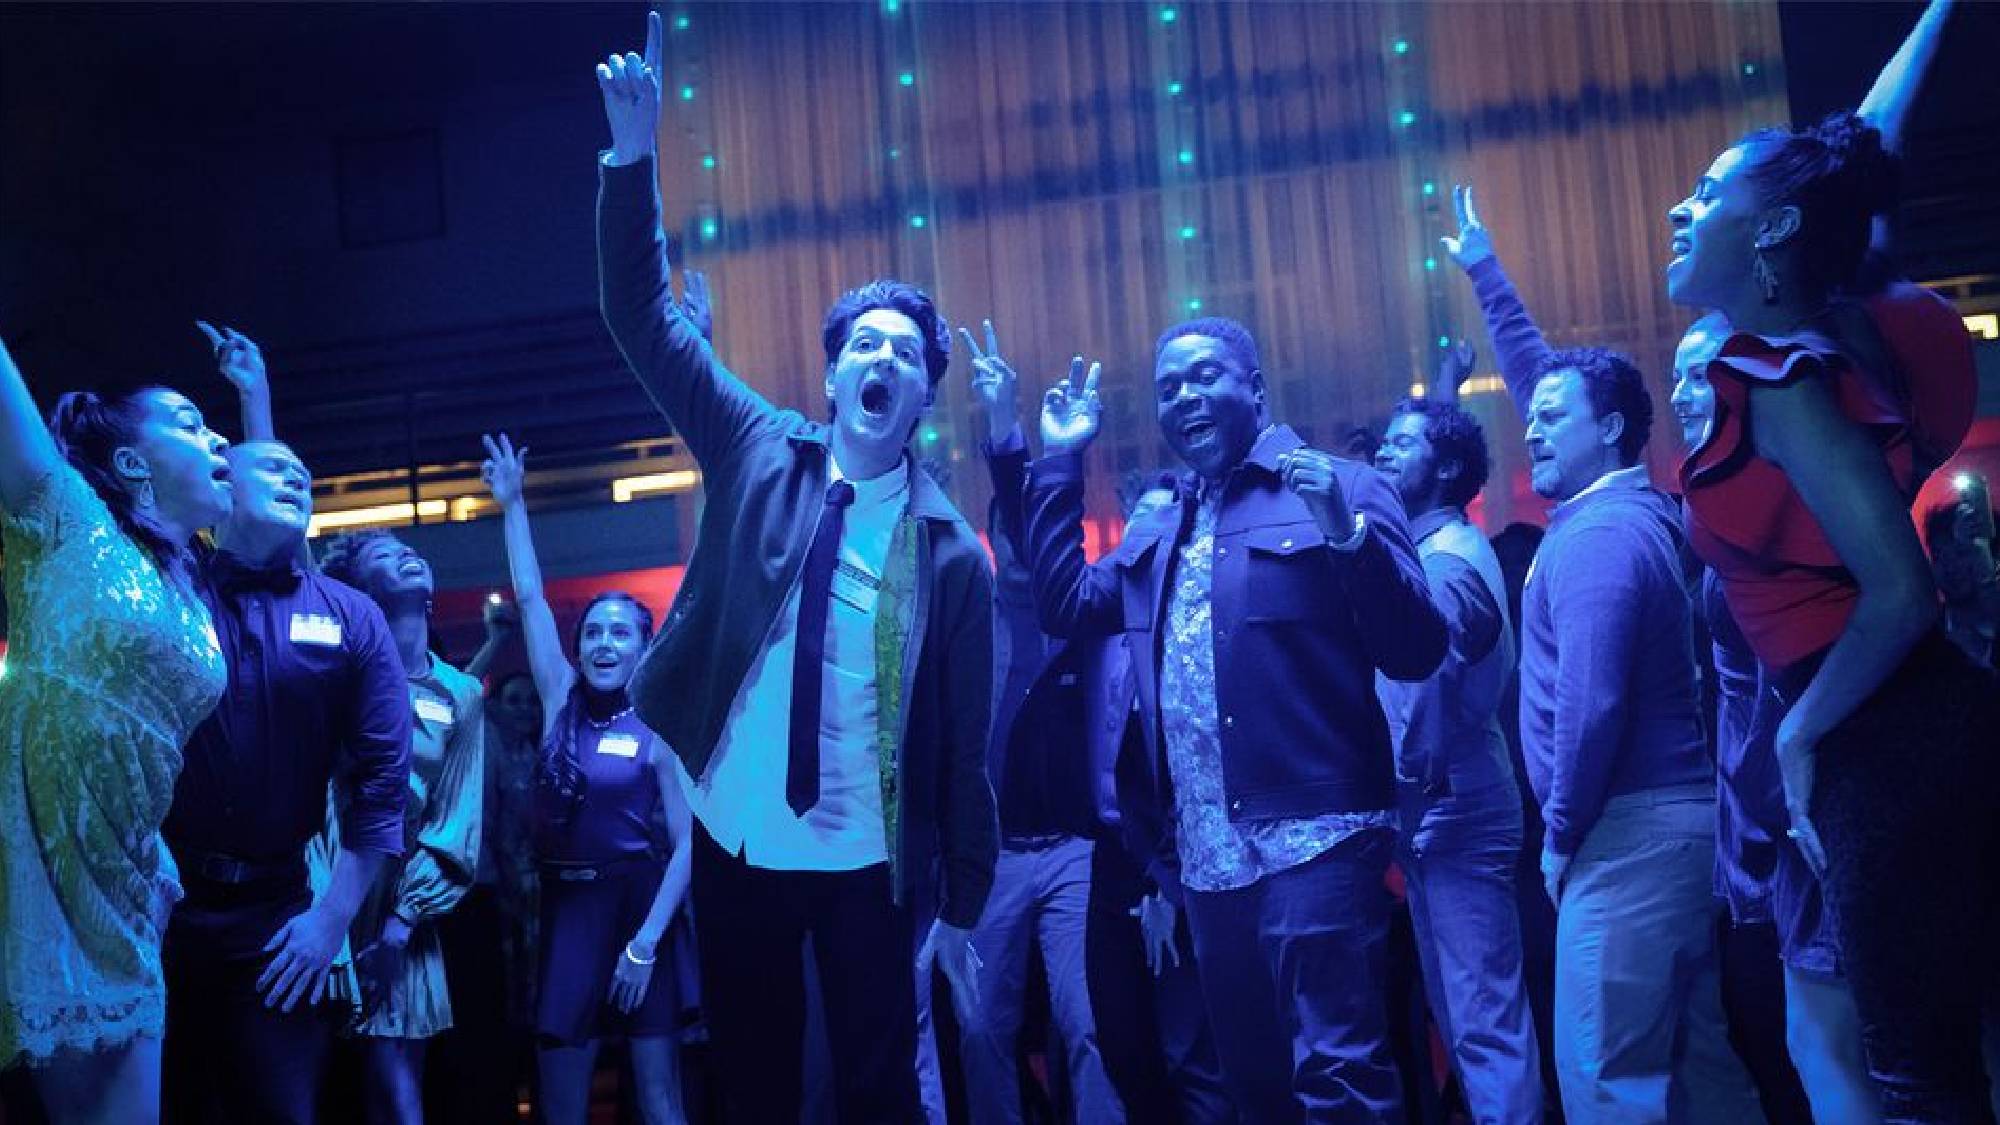 Ben Schwartz as Yasper and Sam Richardson as Aniq in The Afterparty